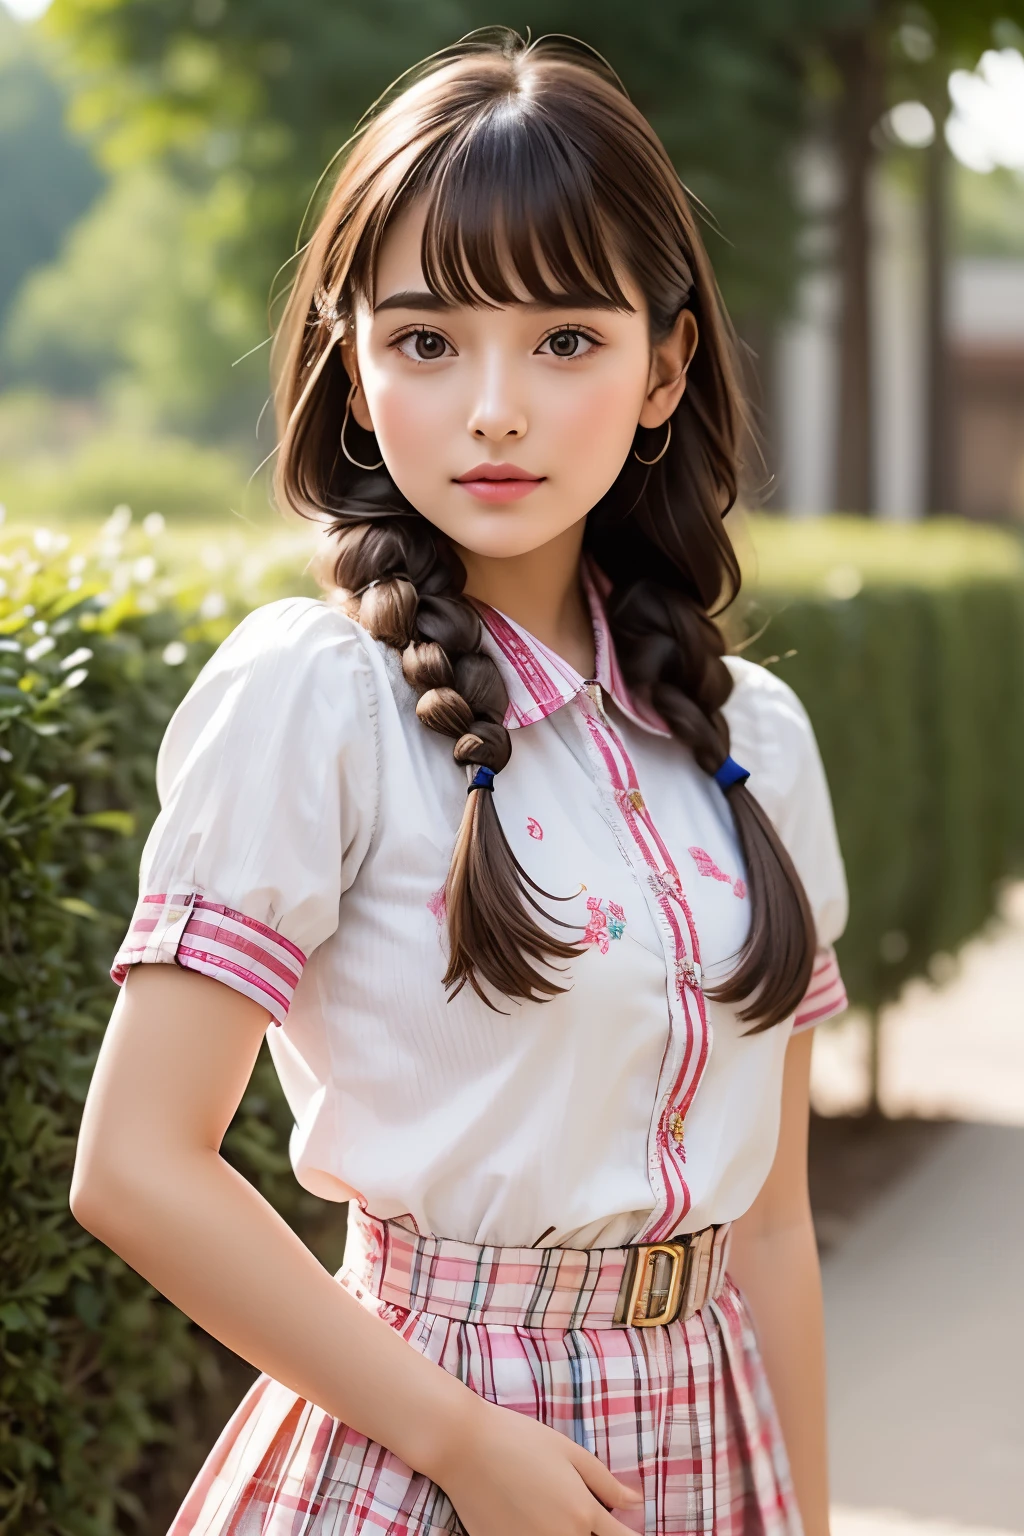 A breathtakingly beautiful and very young girl, exuding an air of innocence and charm. She is dressed in a collared shirt, adorned with checkered stripes, and a short skirt, part of a stunning  ensemble. Her bangs gracefully frame her face, while twin braids cascade down her back, adding a touch of whimsy to her overall appearance. The girl's intricate and delicate linework, as well as her fine details, are a testament to the insane amount of attention given to every aspect of her illustration. Her iridescent brown hair is vividly colored and meticulously crafted, with whimsical patterns and enchanting scenes intertwined throughout.